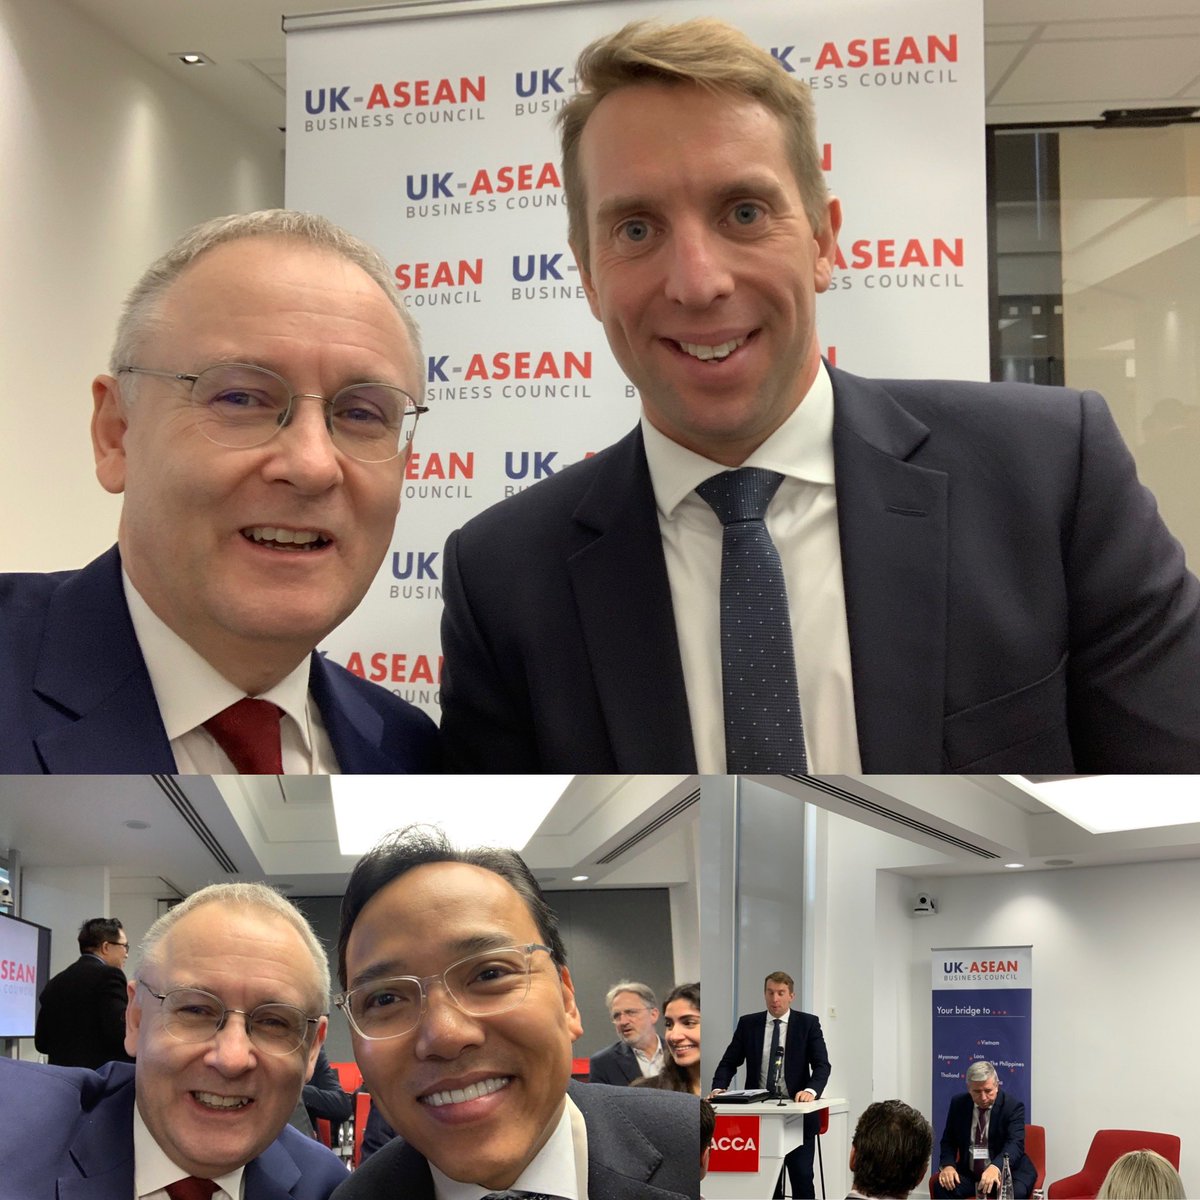 In the good company of Vietnamese Ambassador to the UK HE @Ambassador_Long at today’s excellent @UKASEAN Business Council briefing with Martin Kent, HM Trade Commissioner for Asia Pacific @HMTCAsiaPacific Big opportunities for UK mid-market companies in the AsiaPac region!